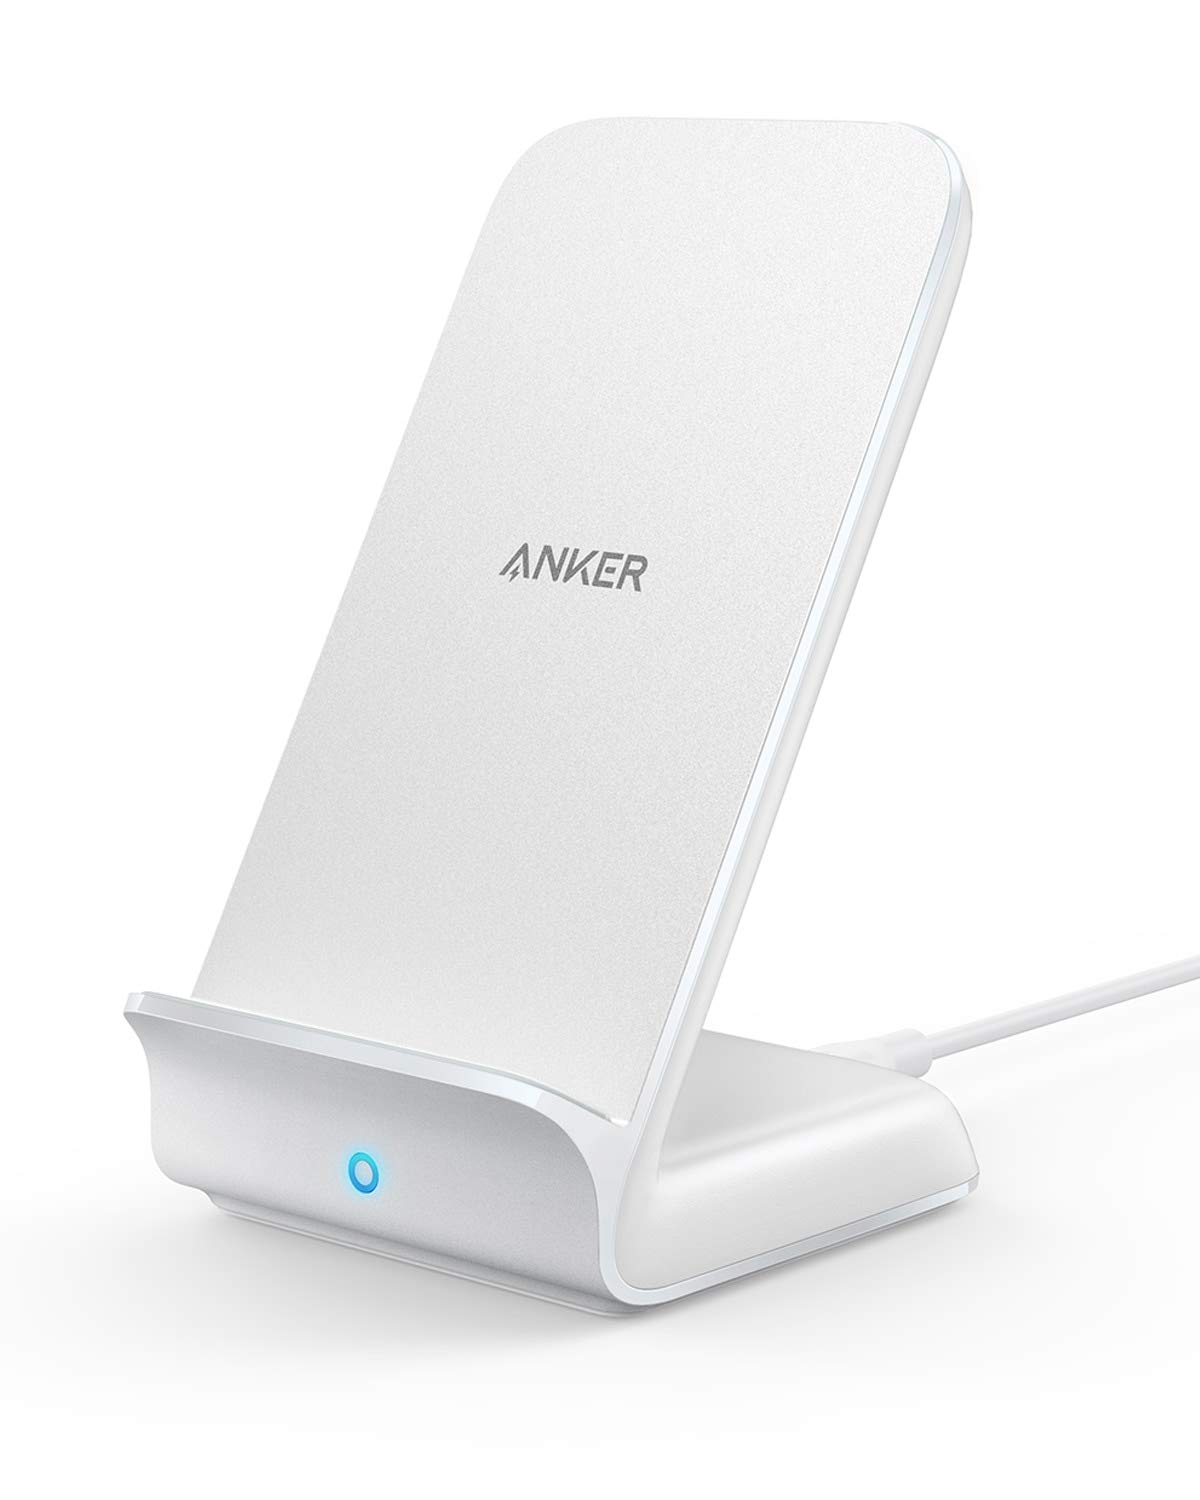 Anker、ワイヤレス充電器｢Anker PowerWave 7.5 Stand｣のホワイトモデルを発売 ｰ 100個限定で20％オフ